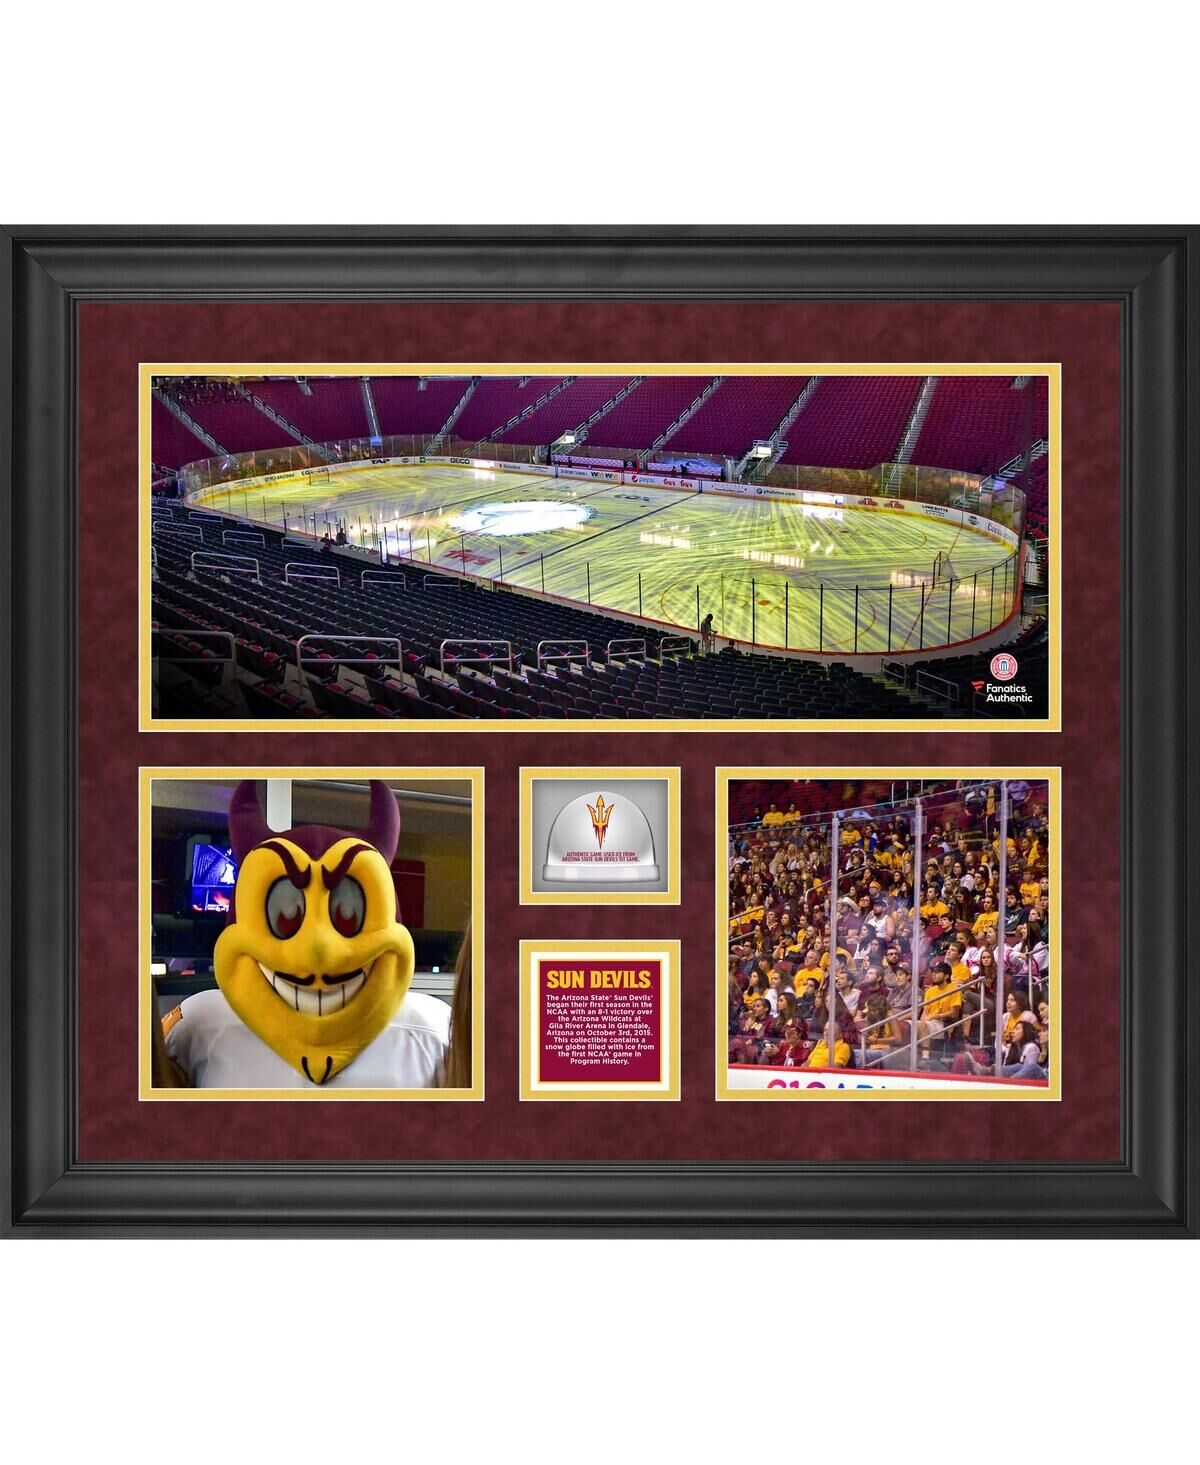 Fanatics Authentic Arizona State Sun Devils Framed Hockey Framed 3-Photograph Collage with Game-Used Ice from the First Ncaa Hockey Game in School History - Multi